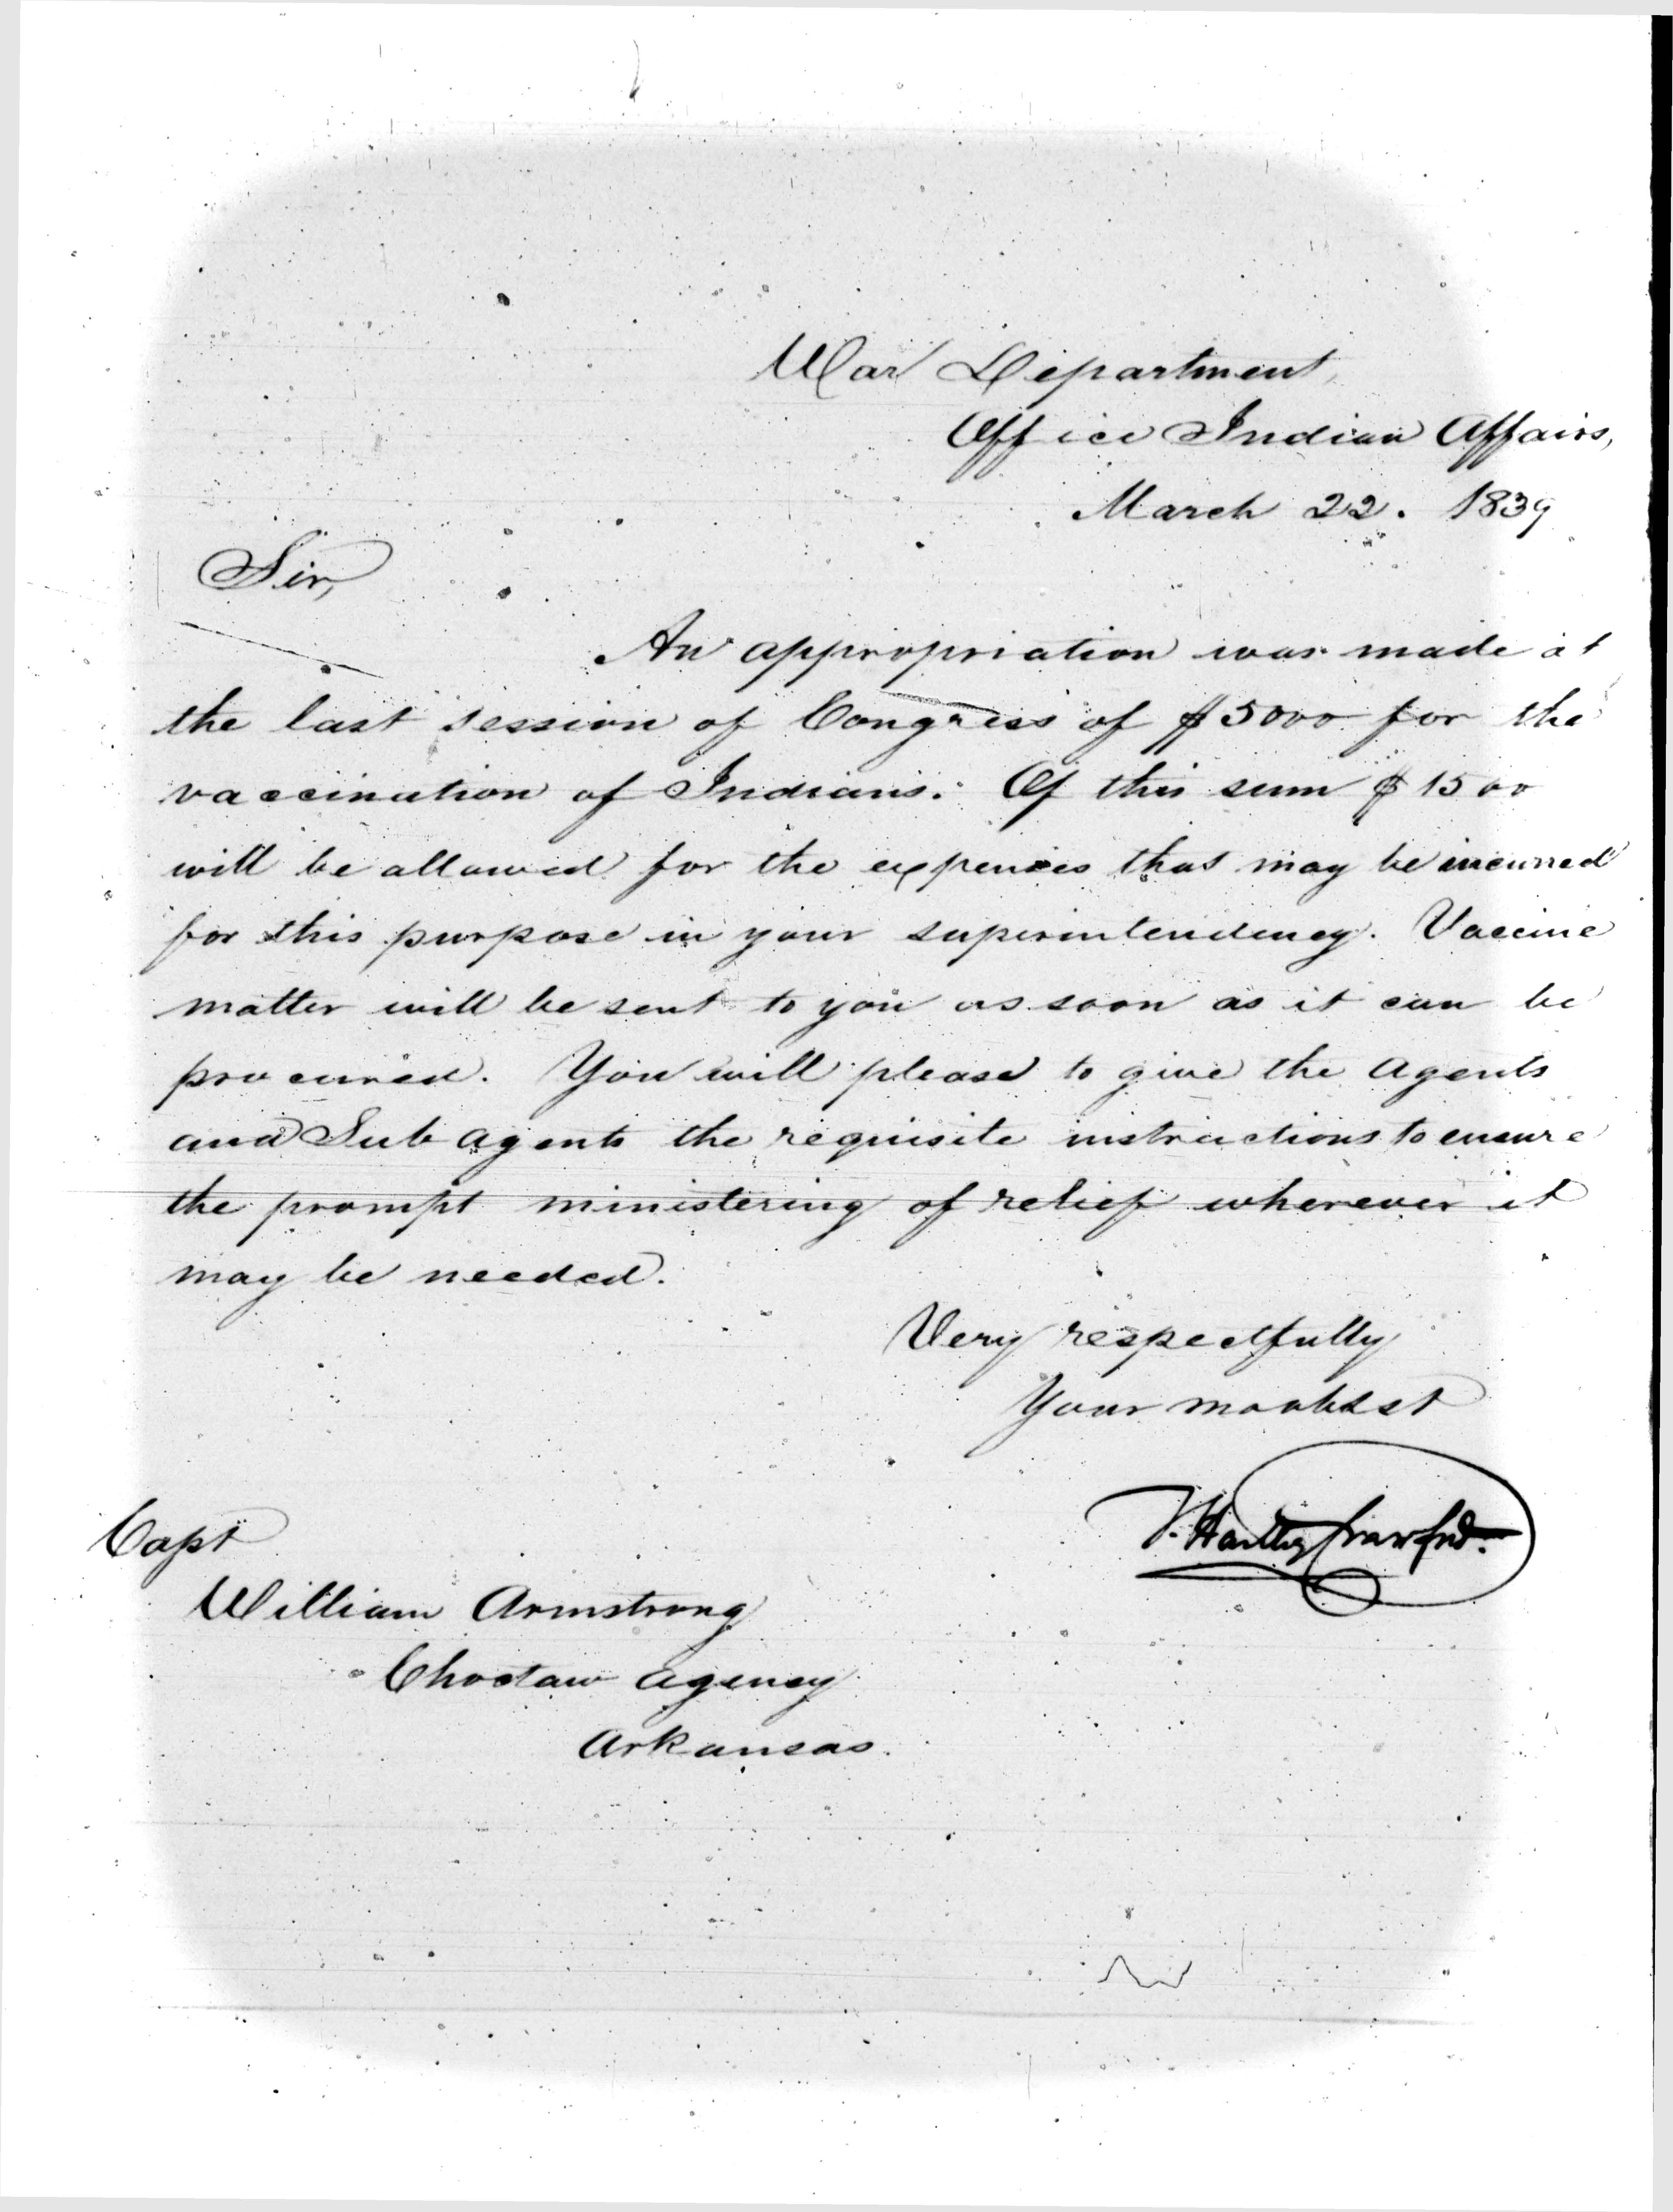 Letter from J.A. Garfield to Jasper A. Viall, Aug. 27, 1872. From Native American Tribal Histories, 1813-1881